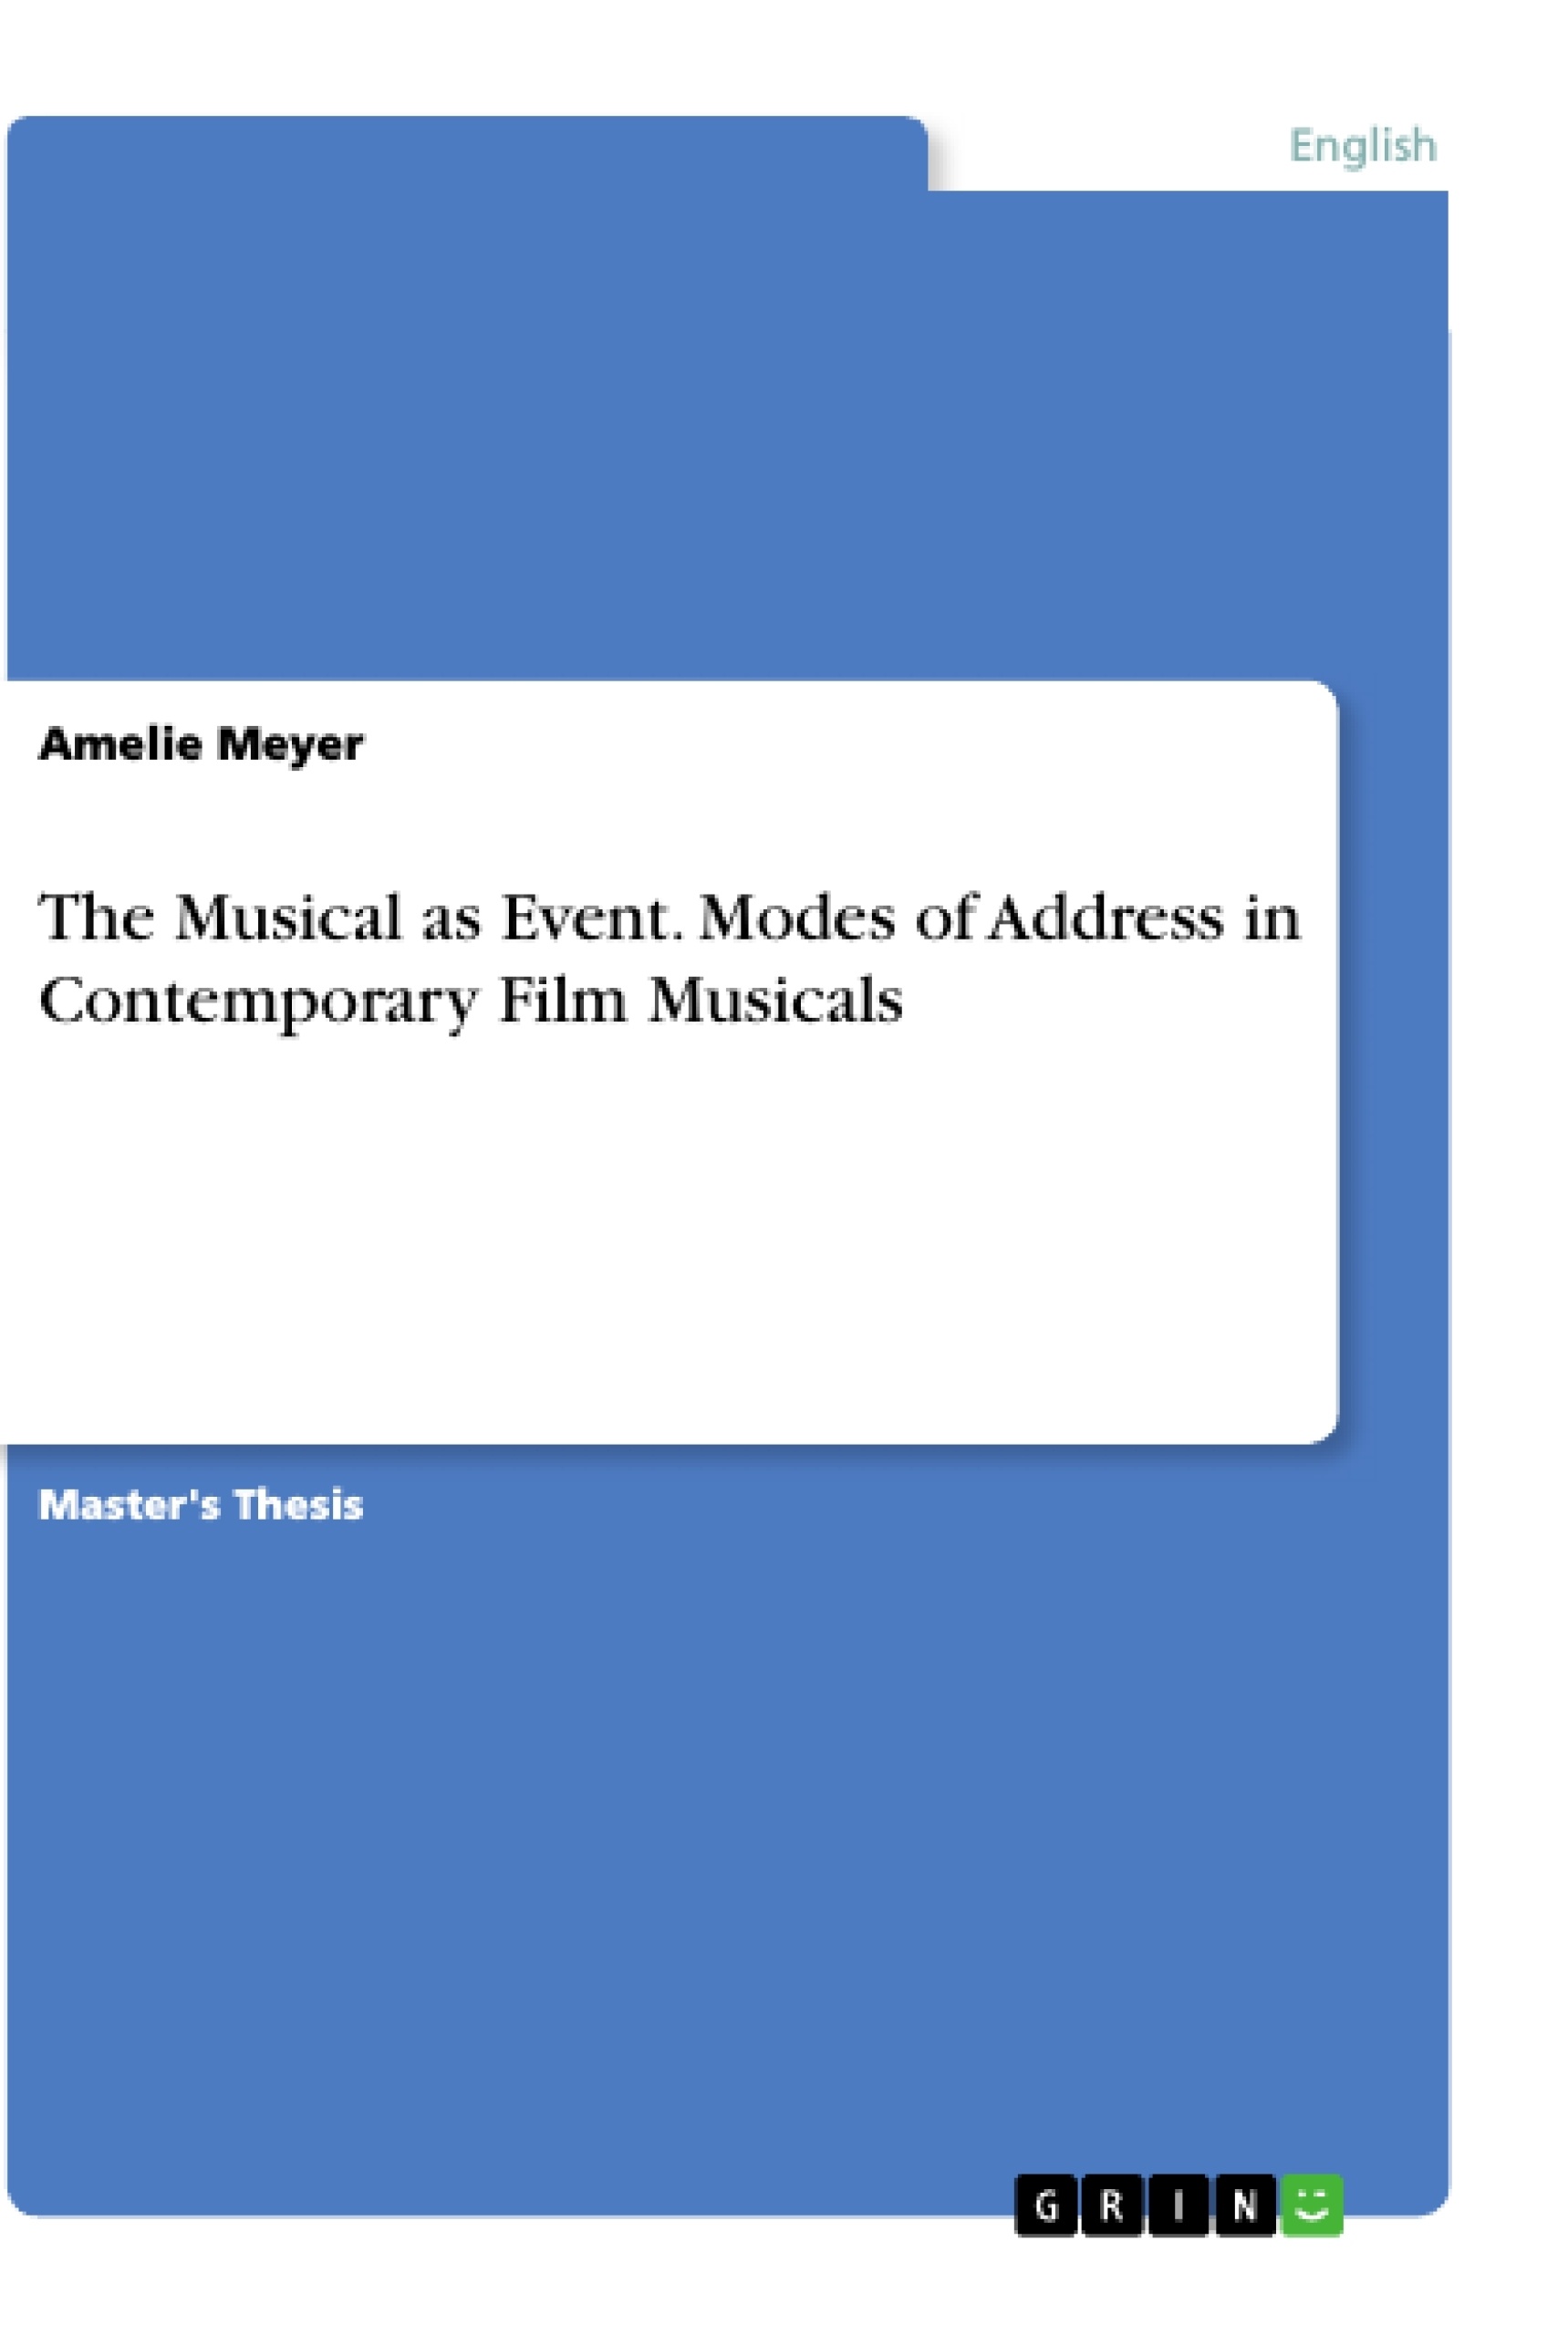 Title: The Musical as Event. Modes of Address in Contemporary Film Musicals